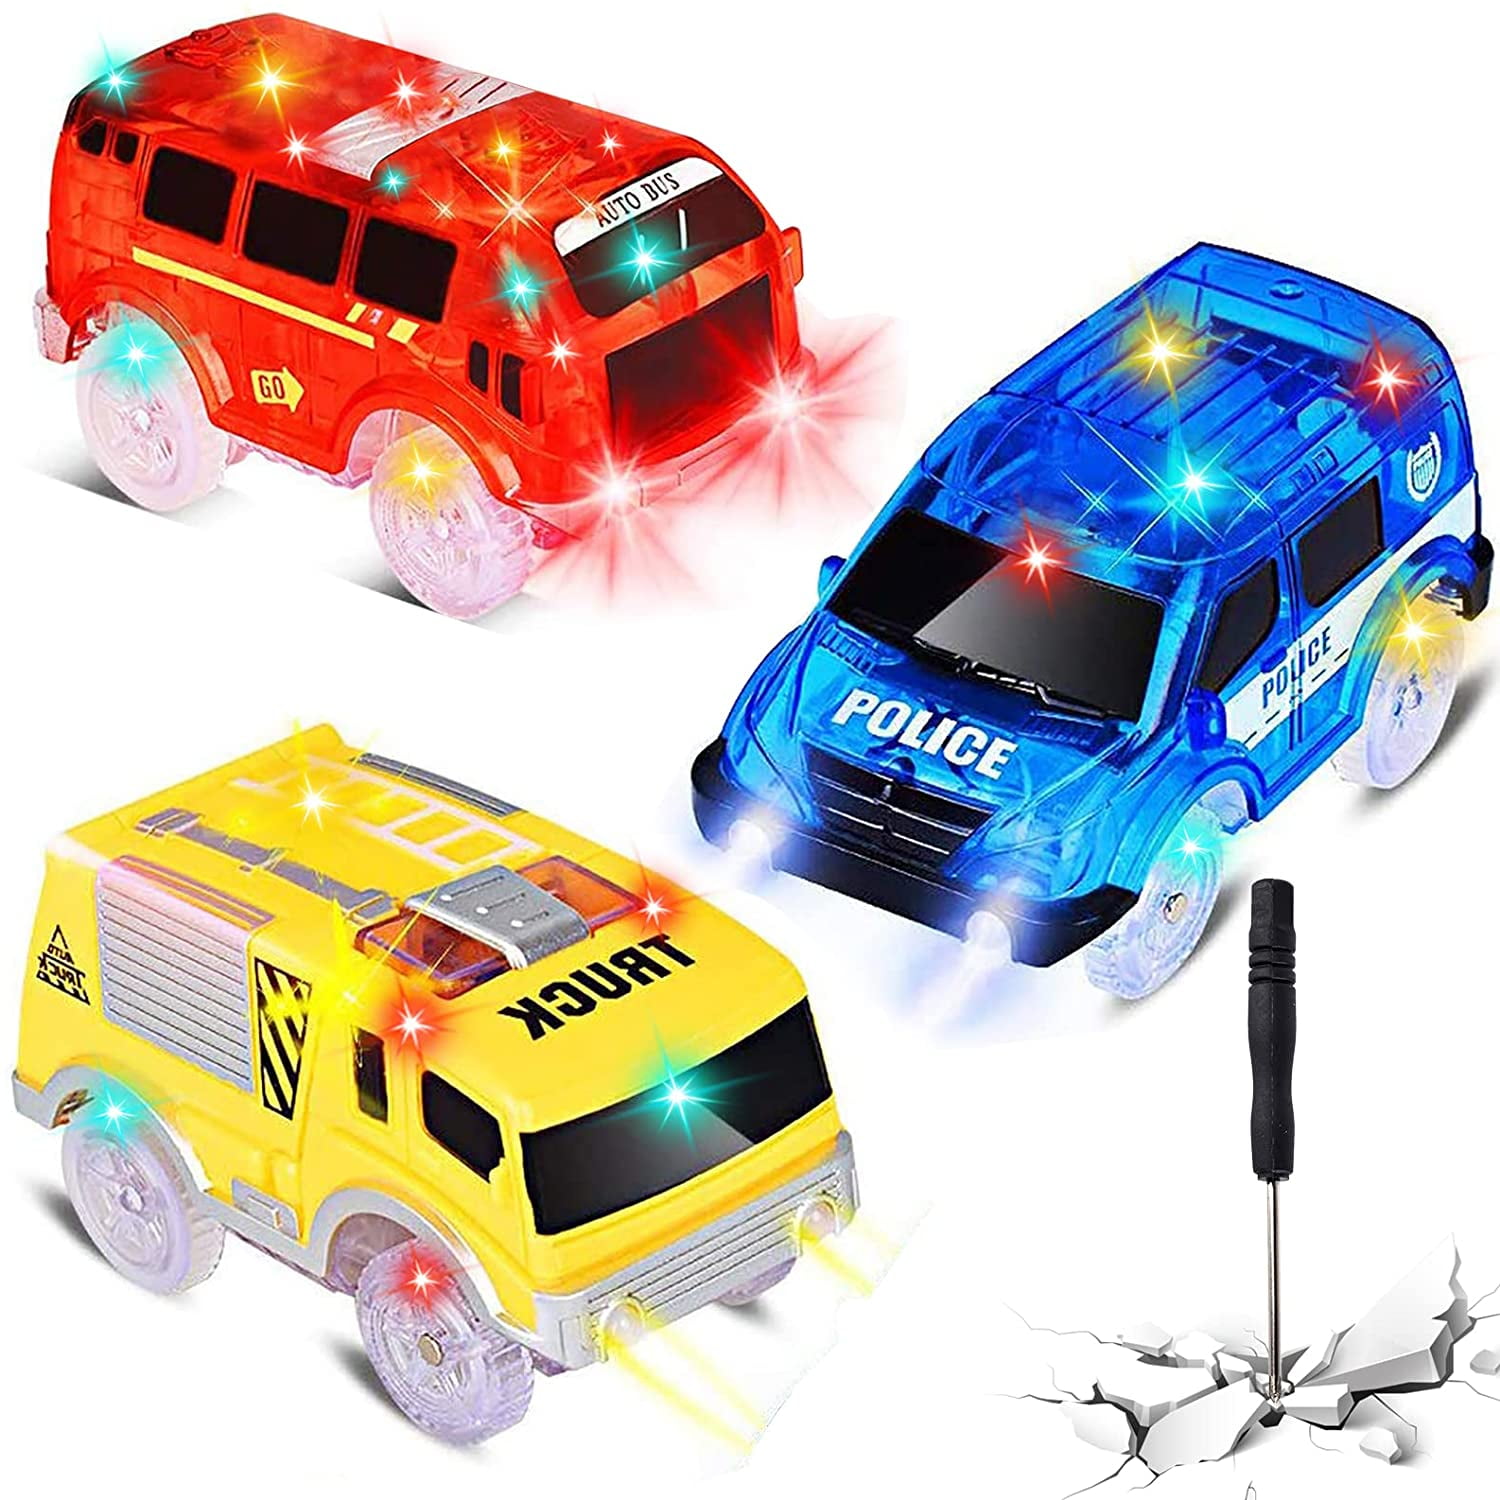 Dearhouse Tracks Cars Replacement Toy Cars for Magic Tracks Glow in the Dar Racing Car Track Accessories with 5 Flashing LED Light Compatible with Most Car Tracks for Kids Boys and